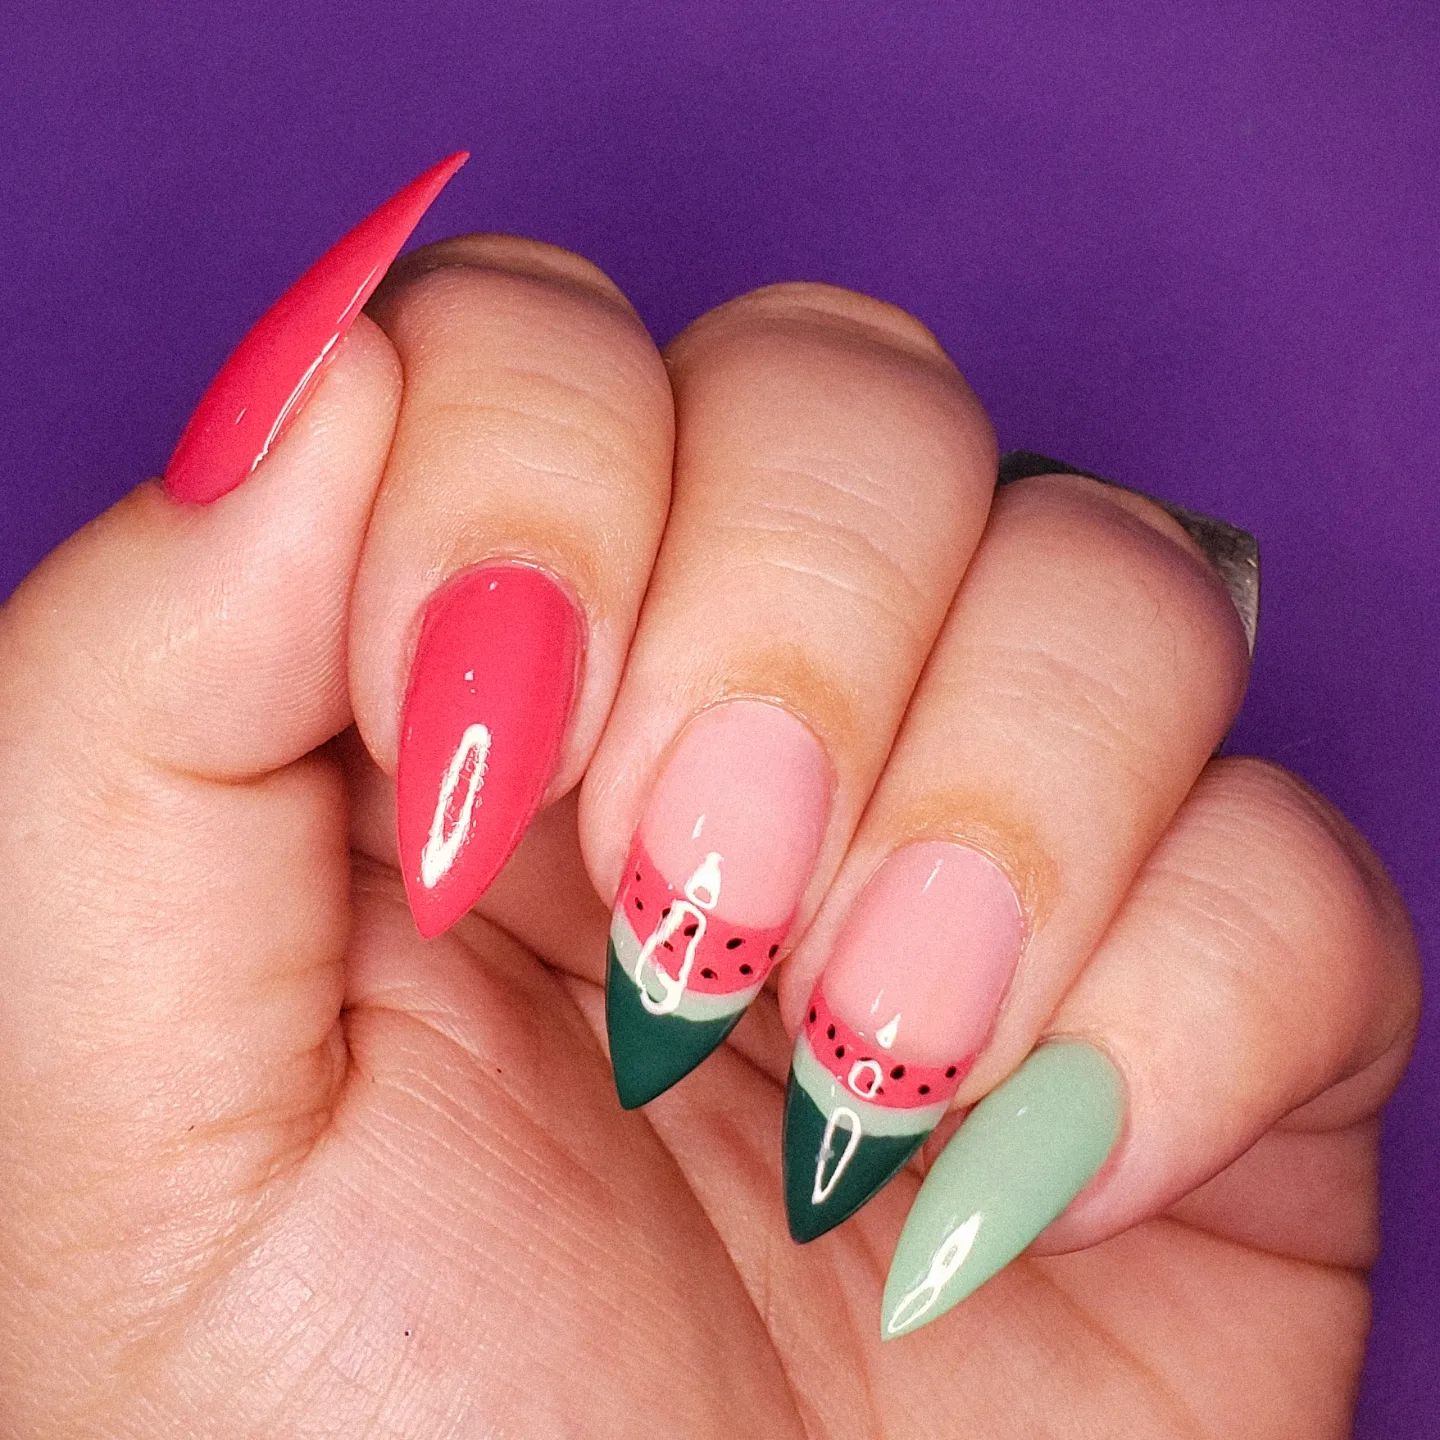 For those who love watermelons should definitely try this out. The pink and light green nail polishes are nice, too.